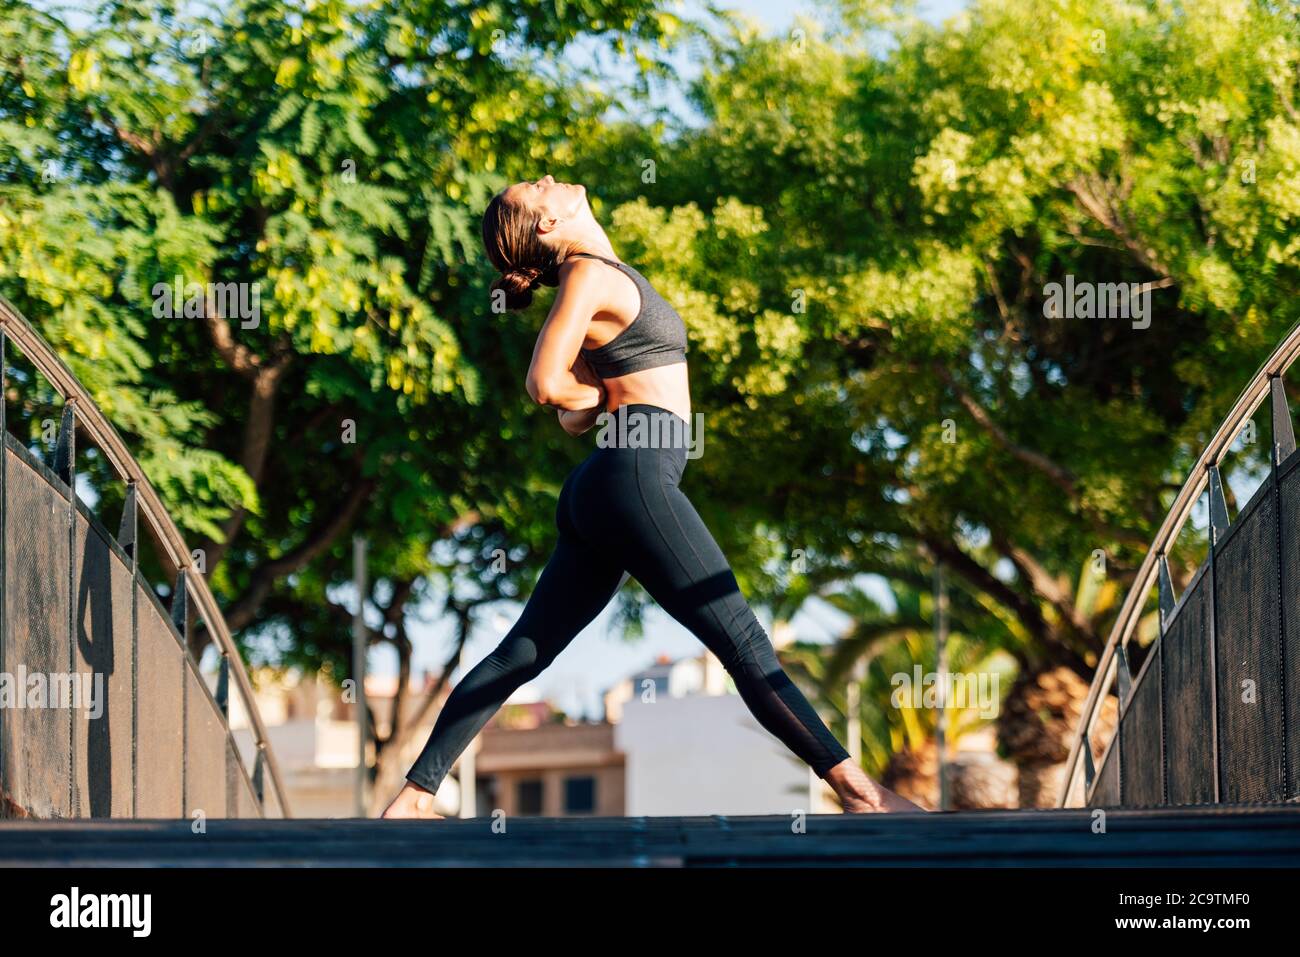 young woman doing exercises on outdoor copper wooden bridge surrounded by gardens Stock Photo